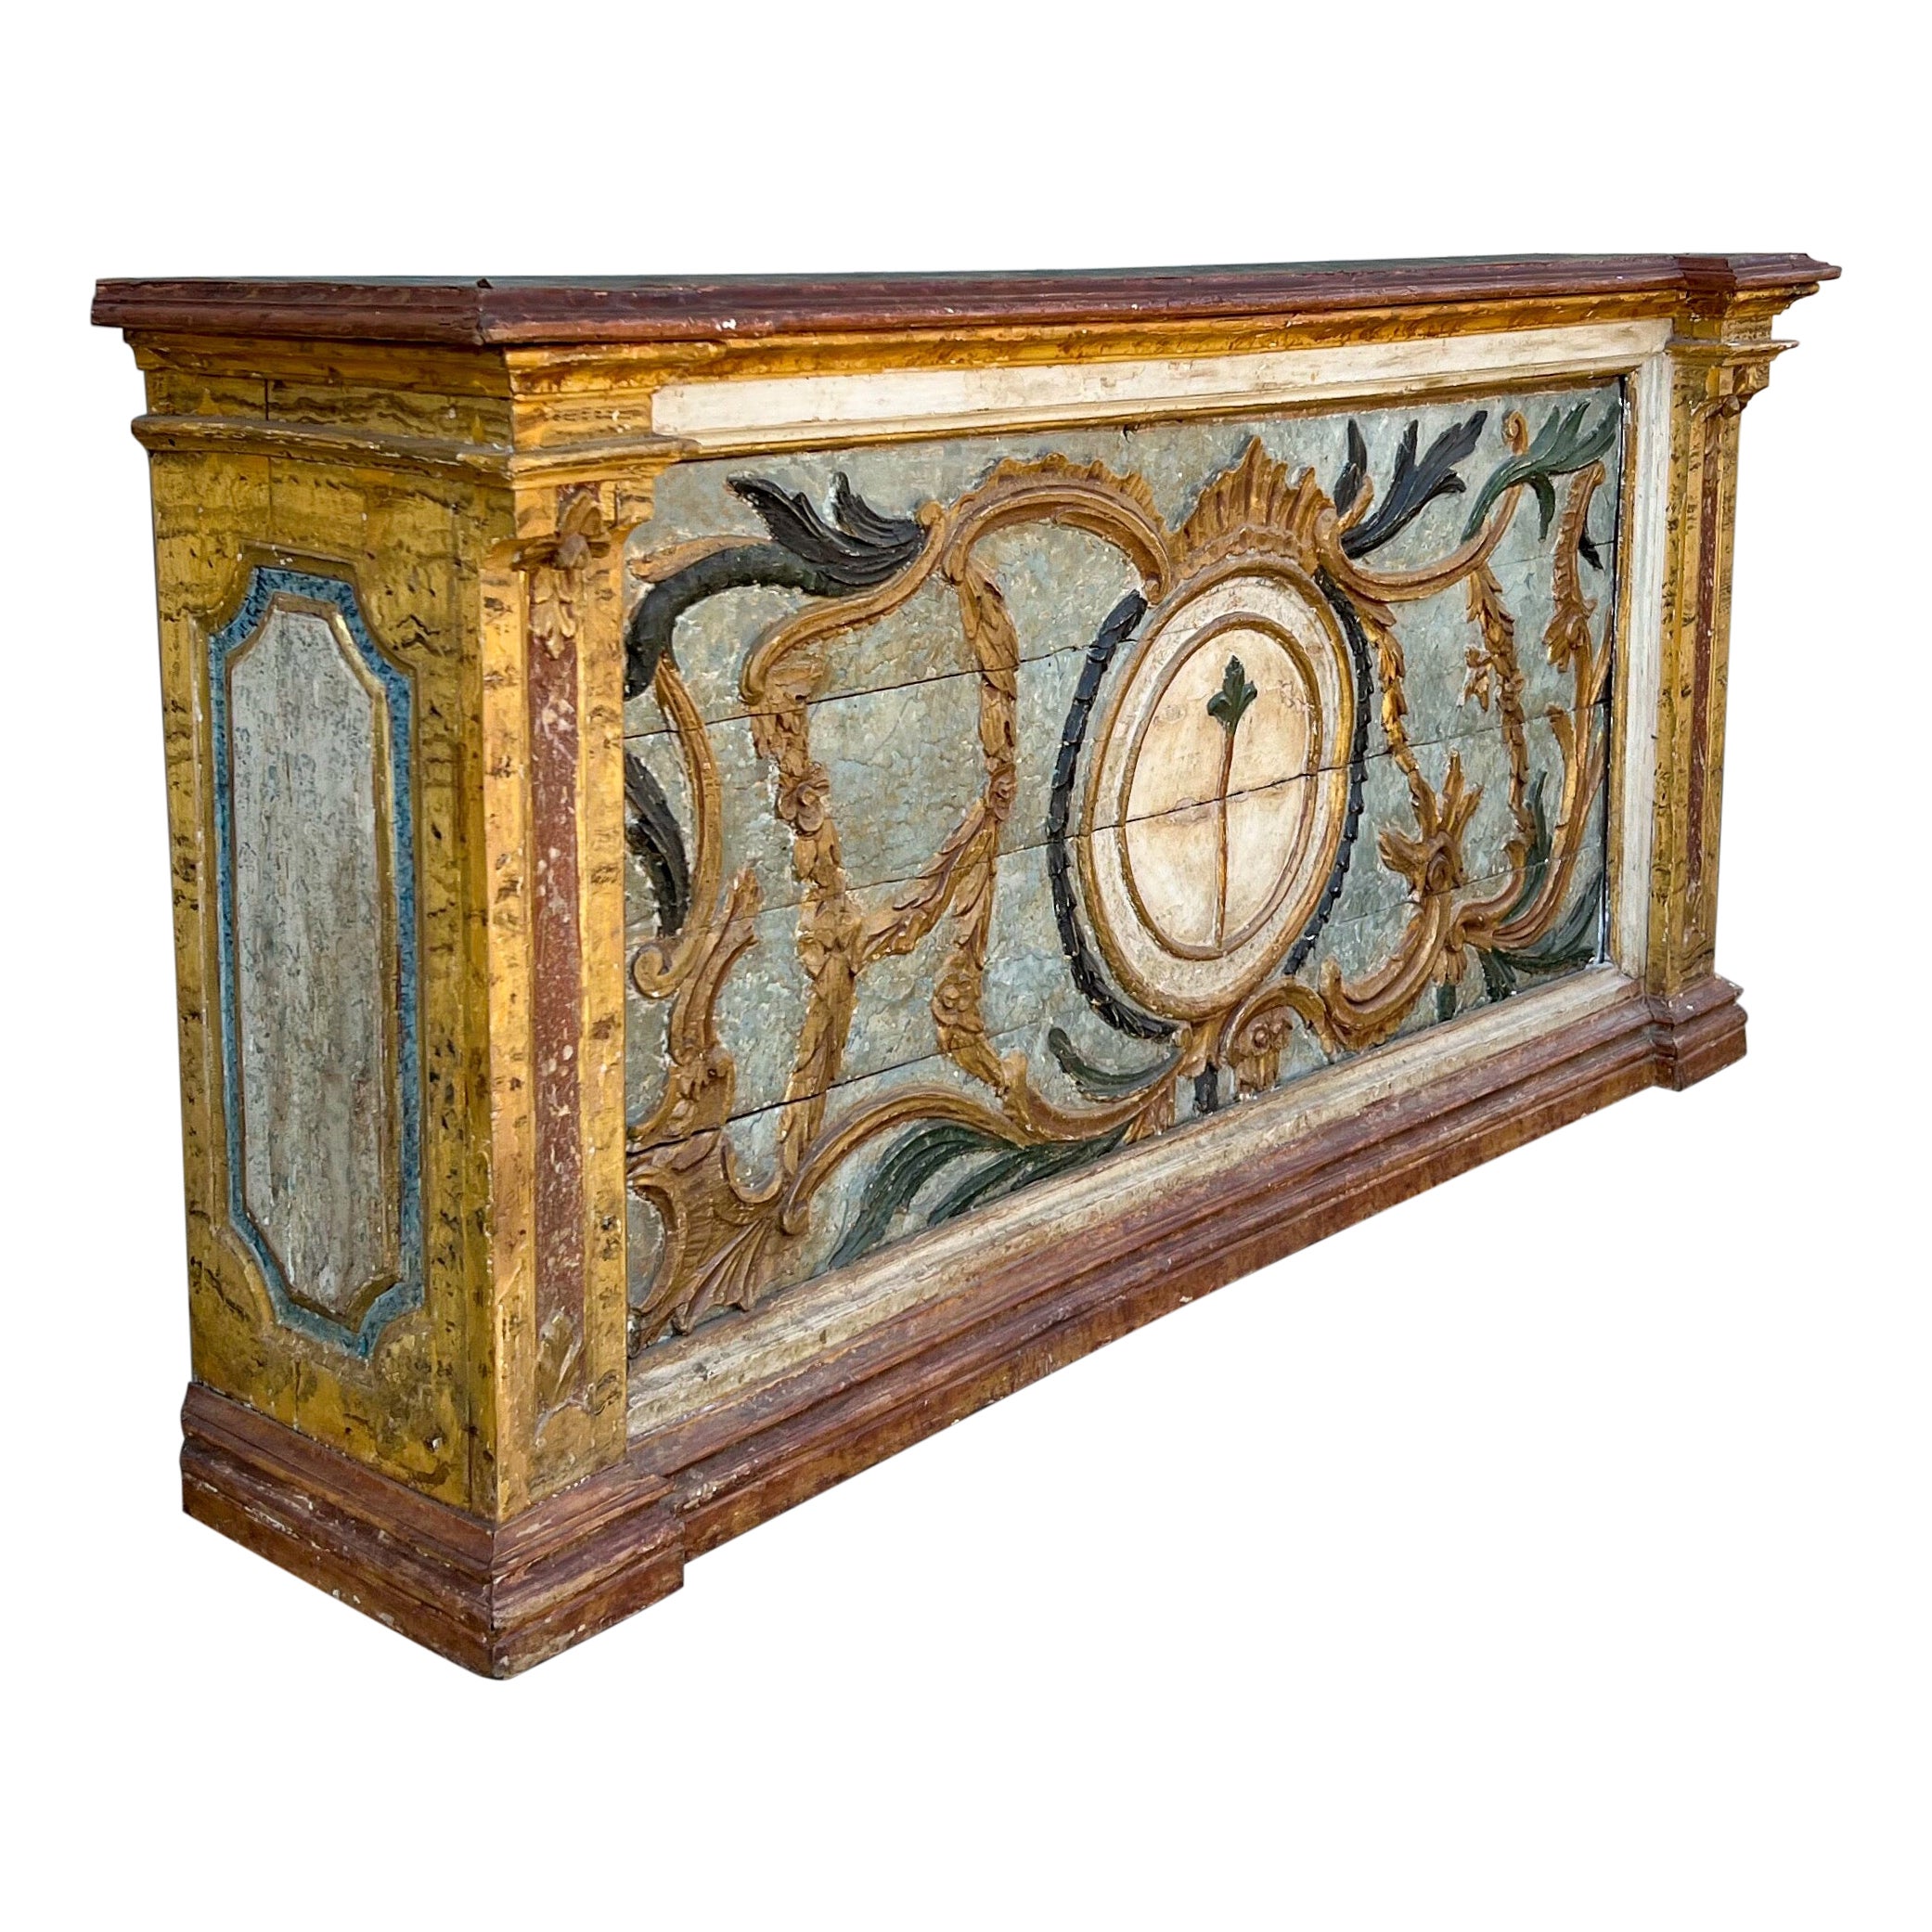 19th Century Hand Painted Italian Neoclassical Style Credenza or Console Table For Sale